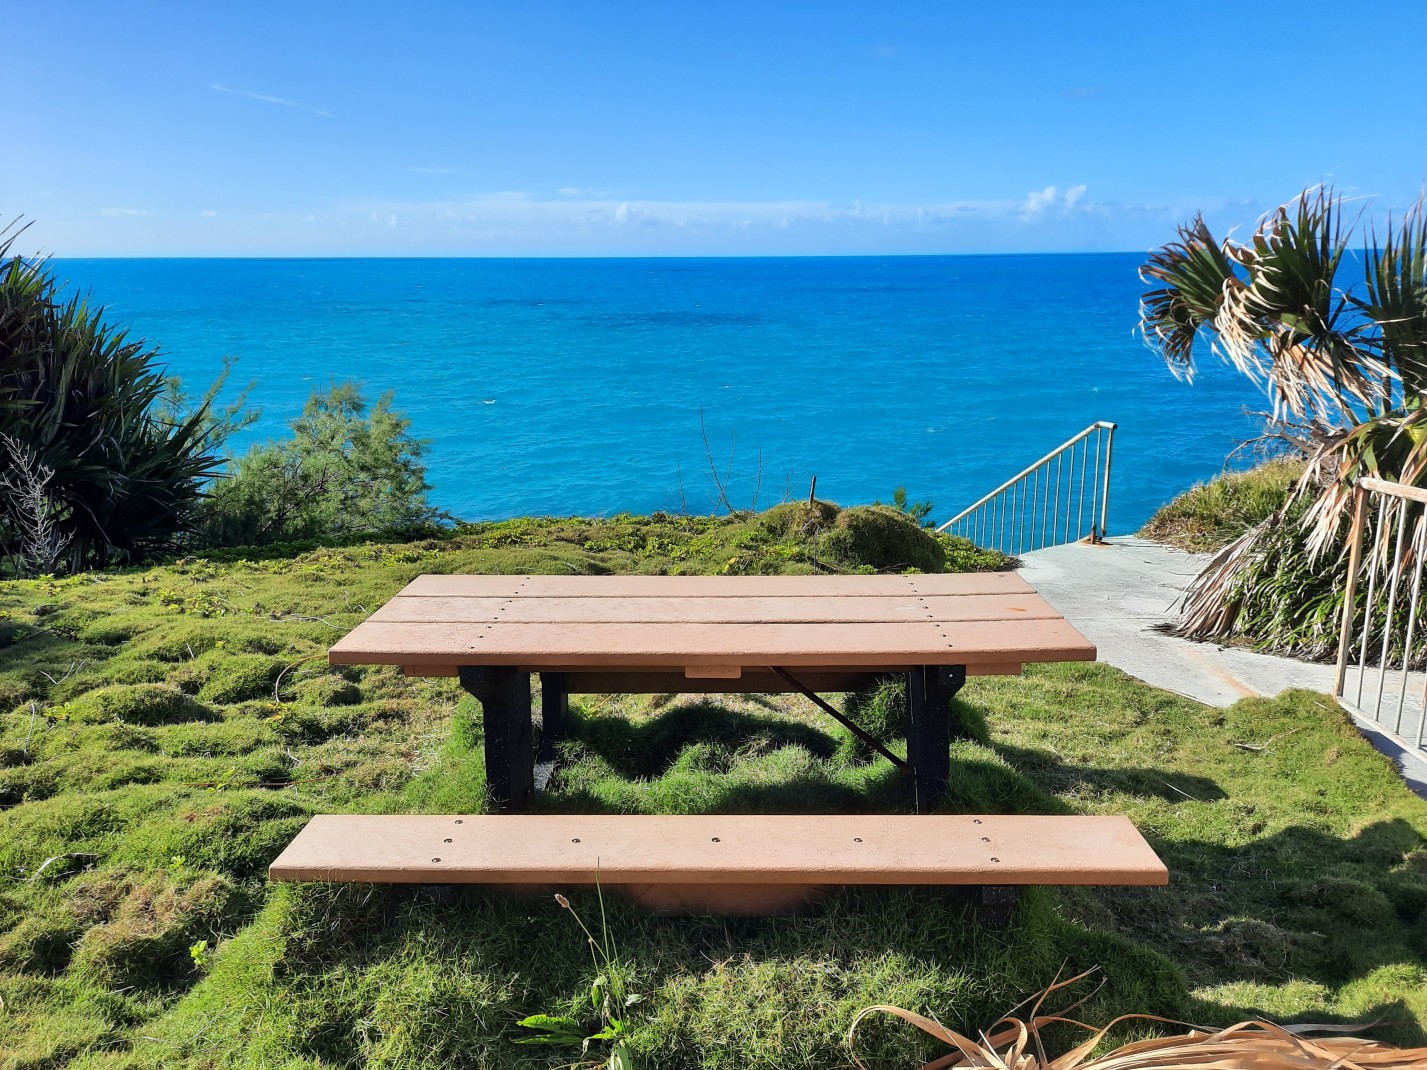 Wood picnic table on grass with ocean and blue sky